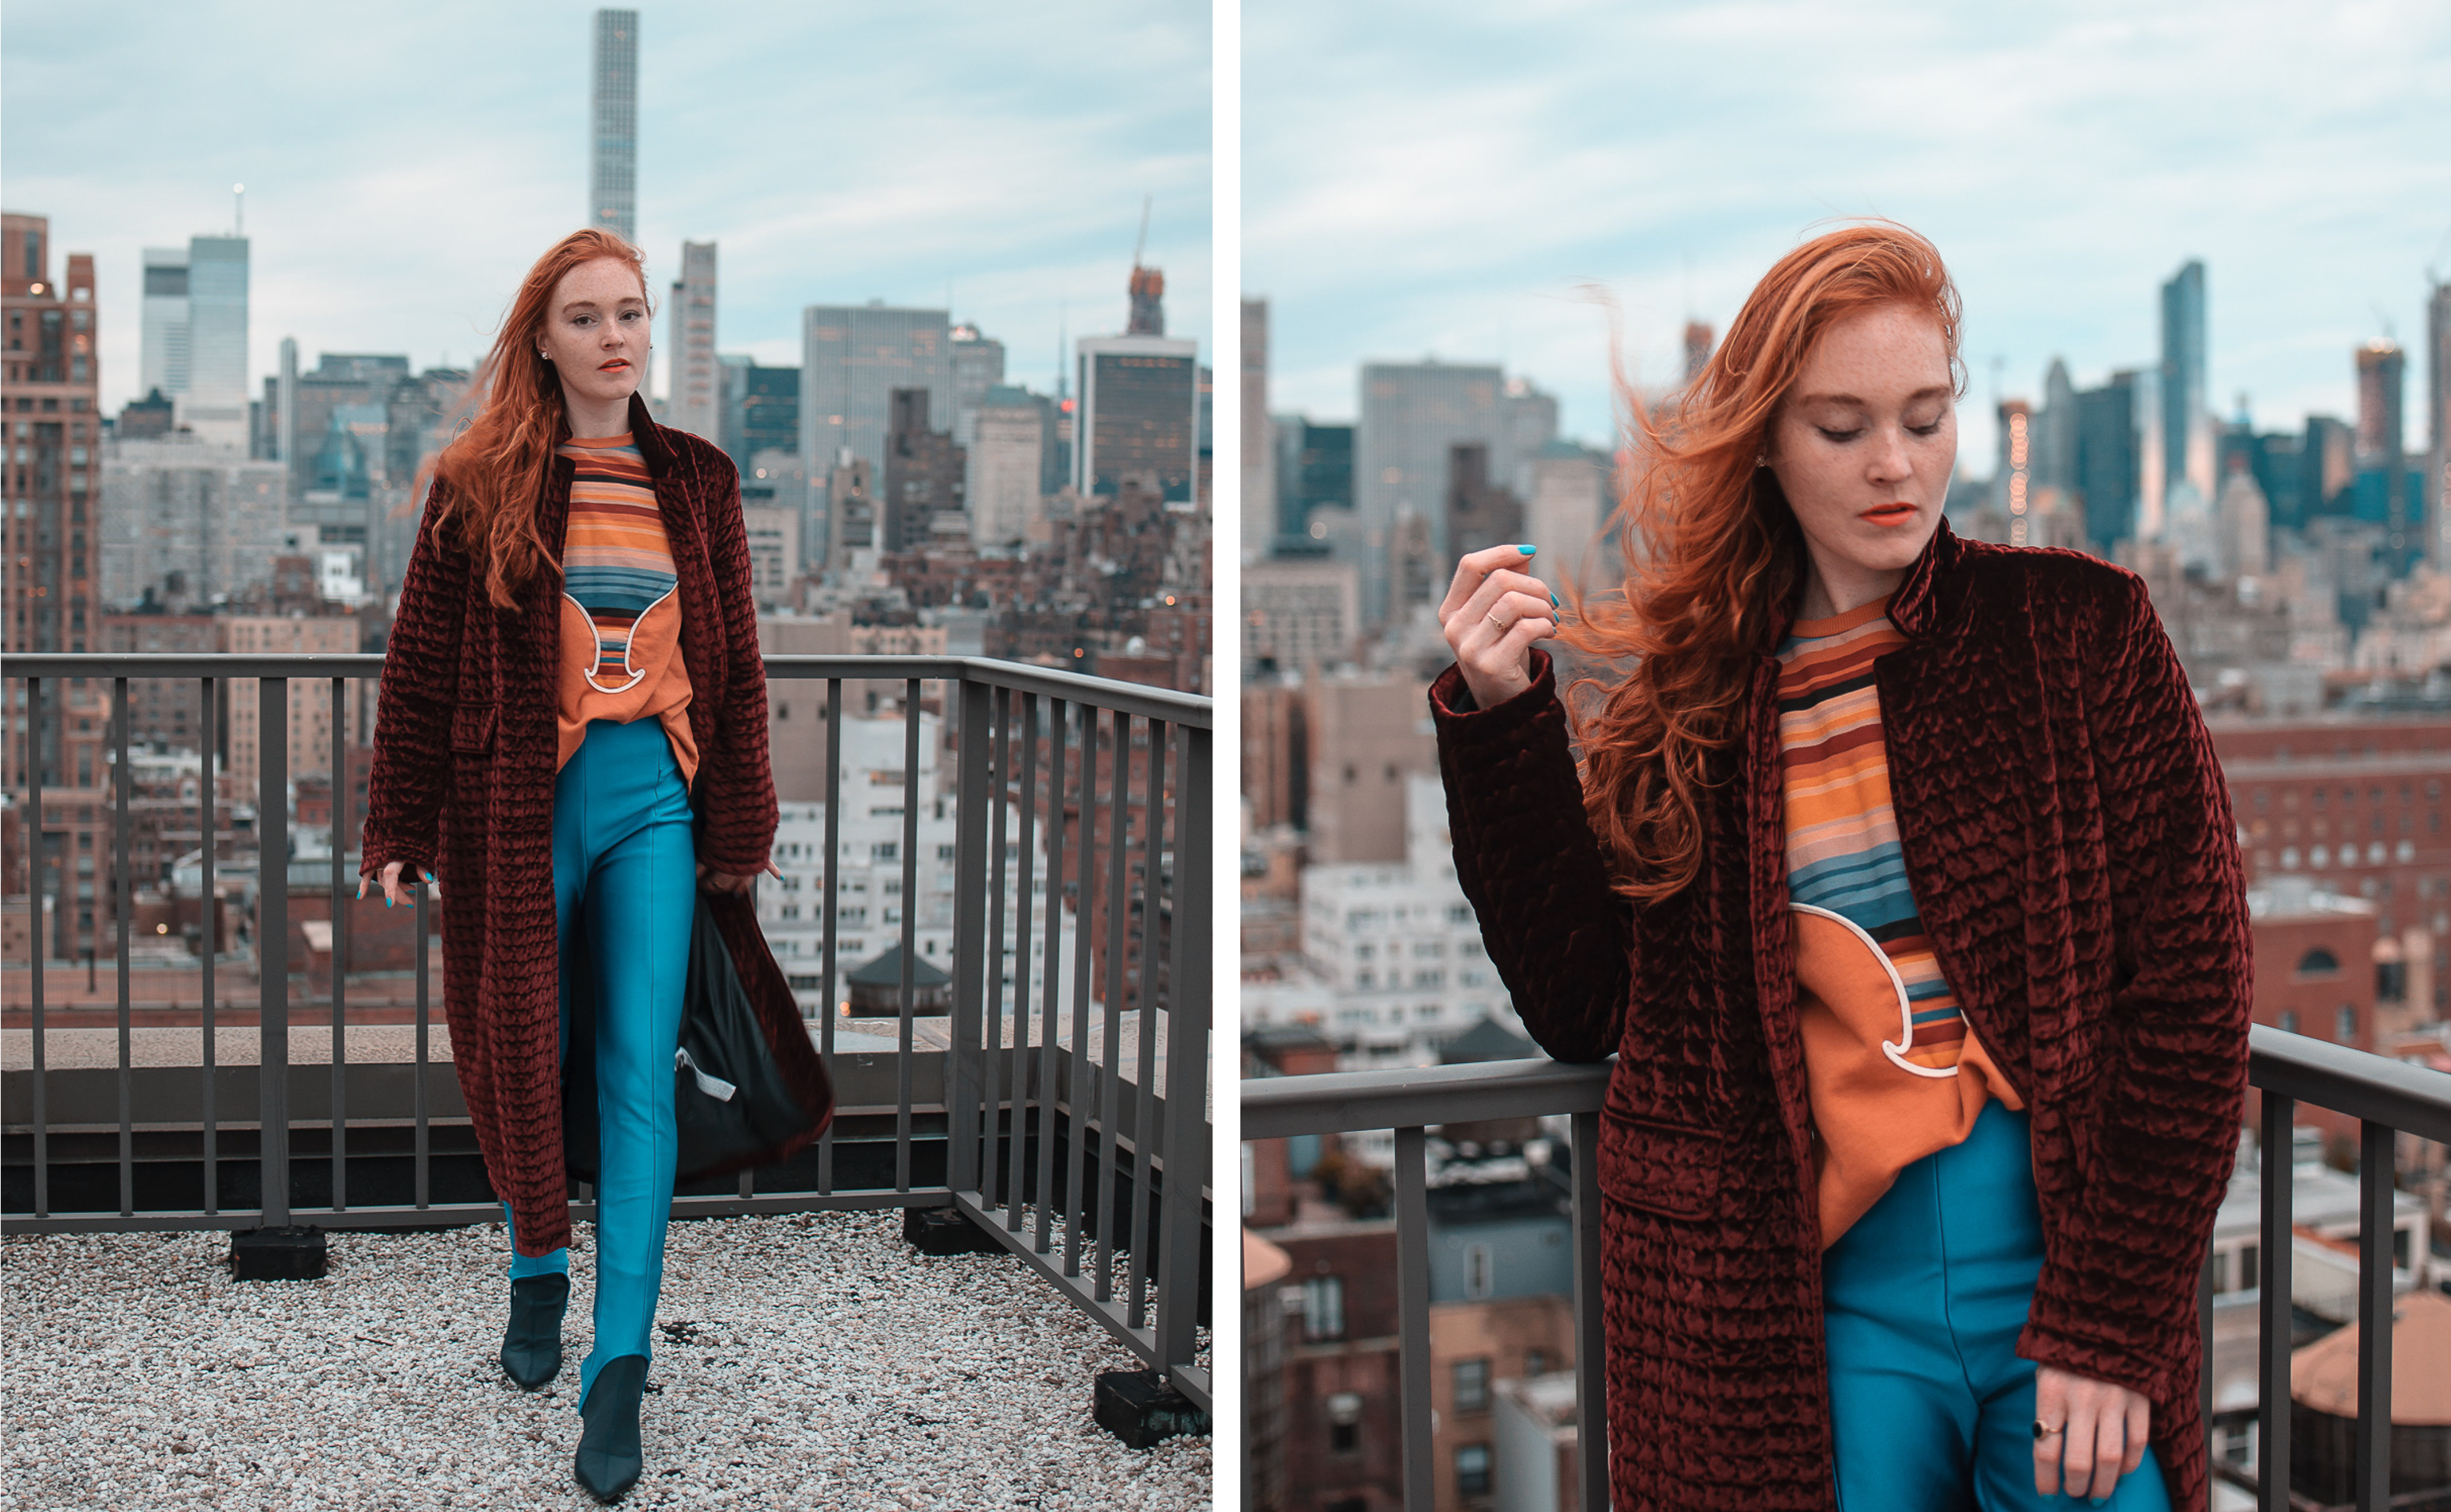 zara coat and stirrup pants on new york city rooftop